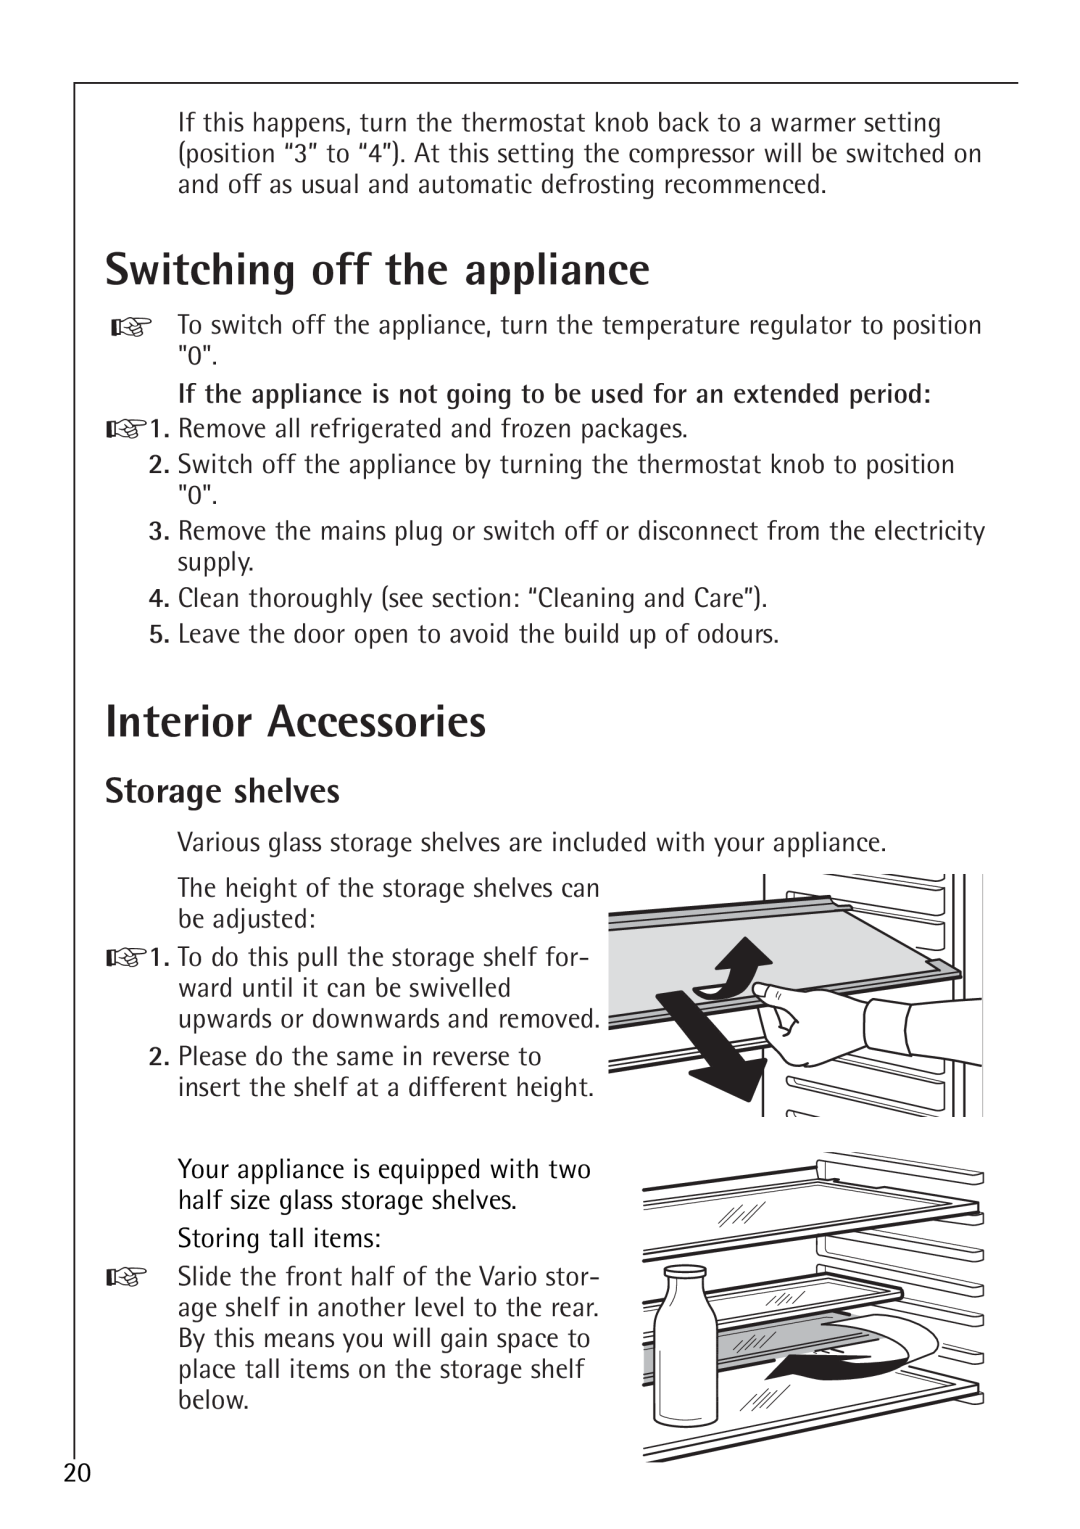 Electrolux SANTO U 86040 i installation instructions Switching off the appliance, Interior Accessories, Storage shelves 